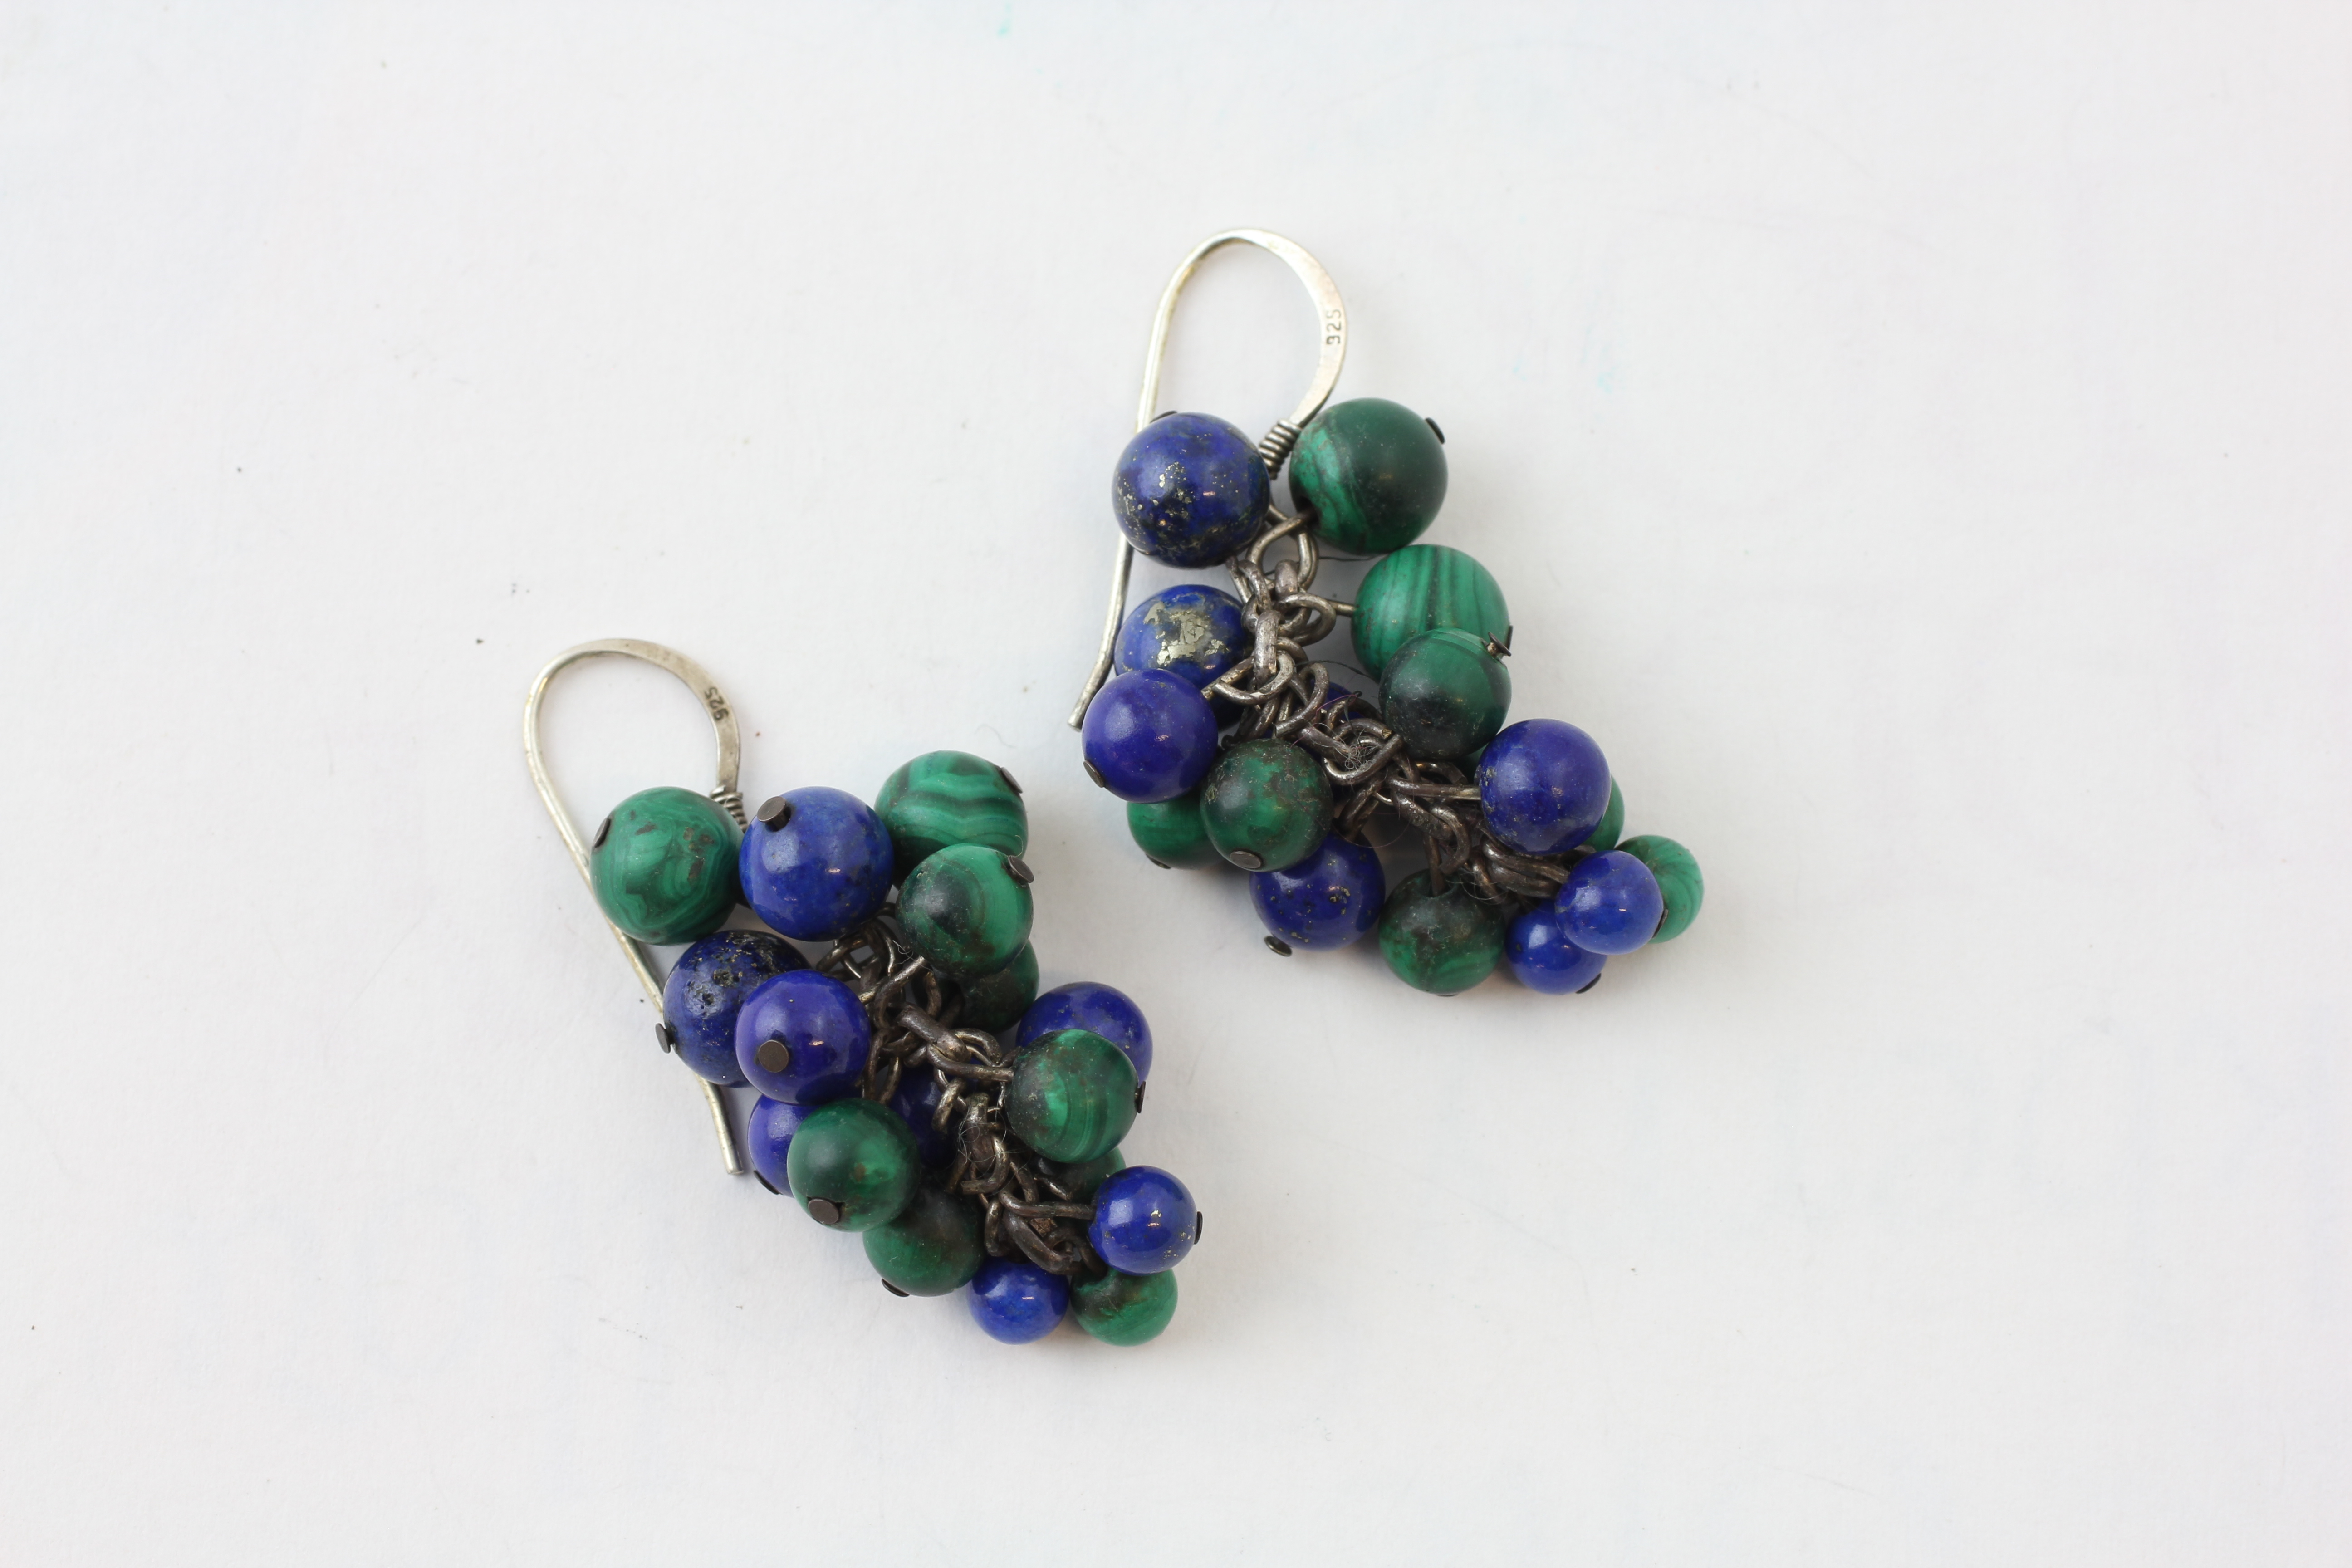 A PAIR OF STERLING SILVER COSTUME EARRINGS OF HARDSTONE CLUSTER FORM, MALACHITE AND BLUE STONES,